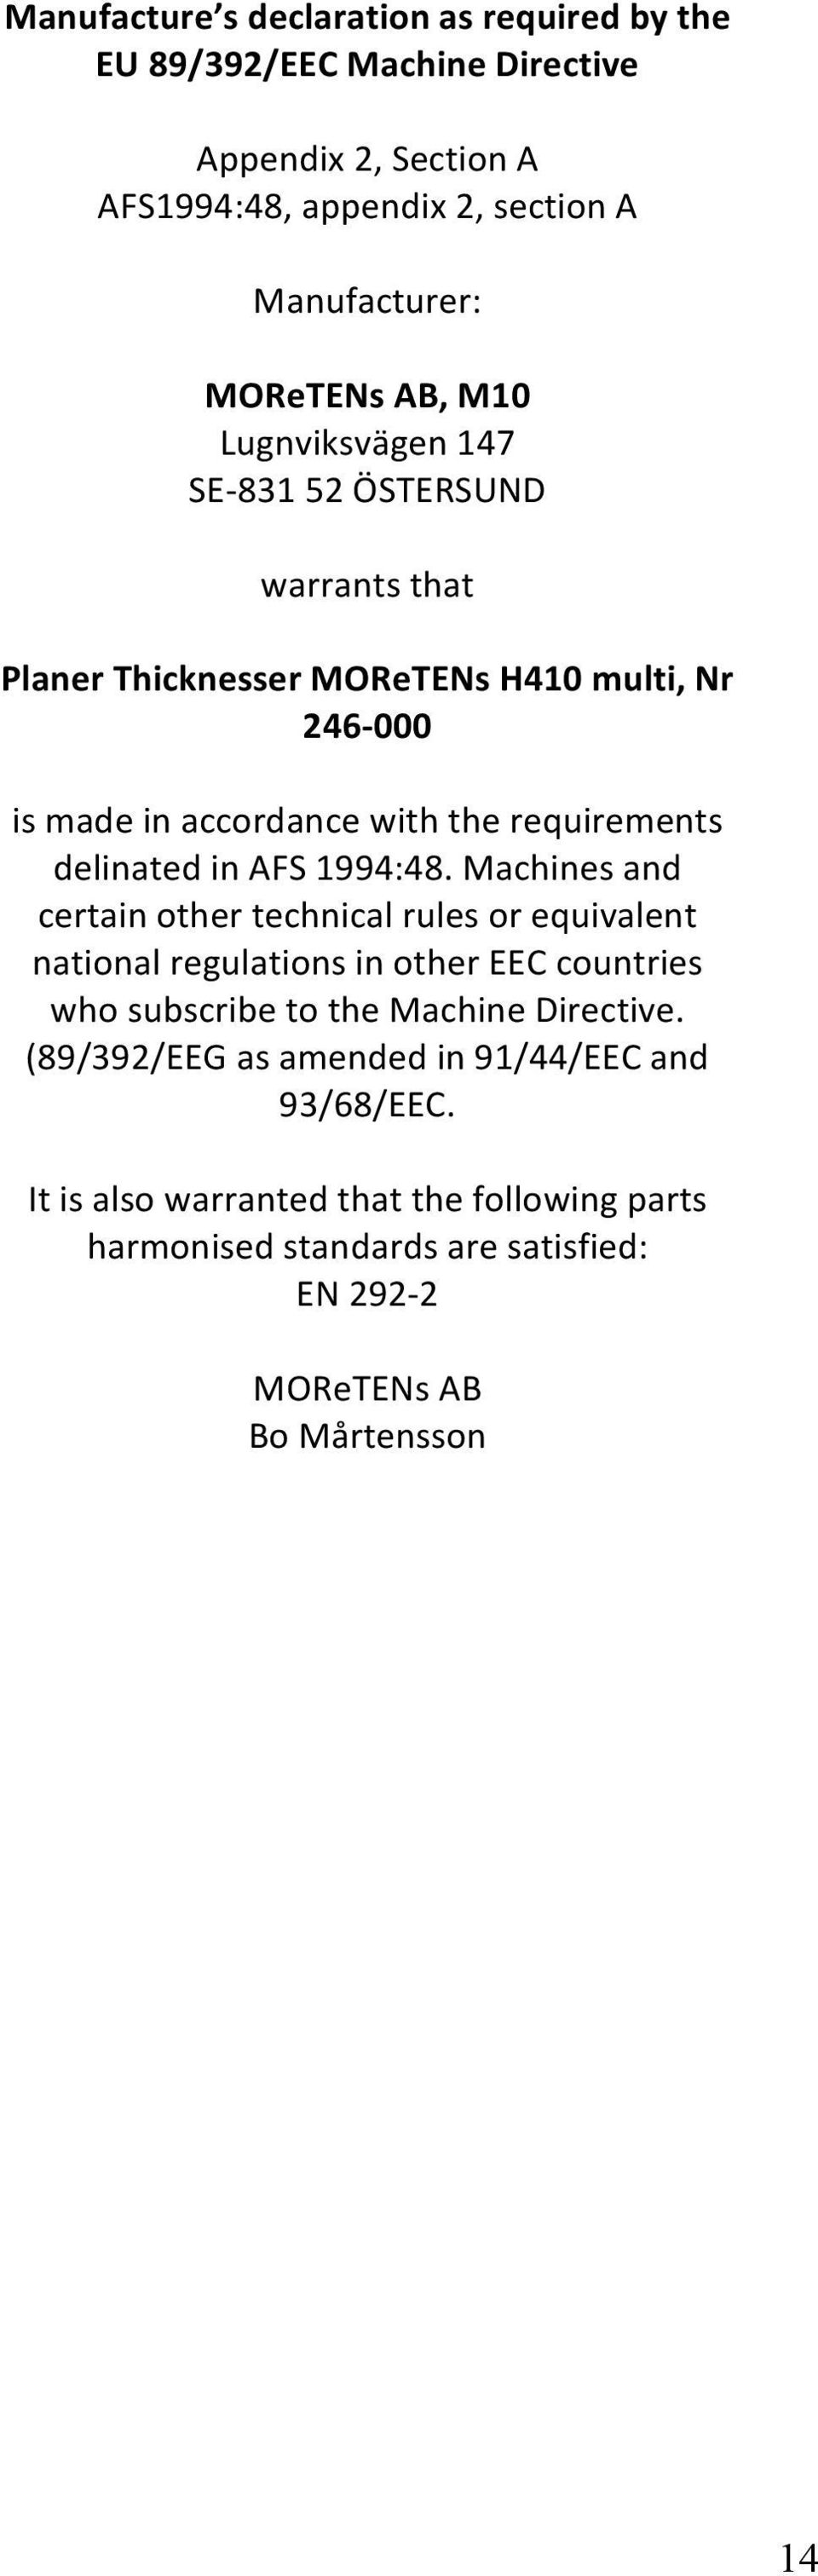 in AFS 1994:48. Machines and certain other technical rules or equivalent national regulations in other EEC countries who subscribe to the Machine Directive.